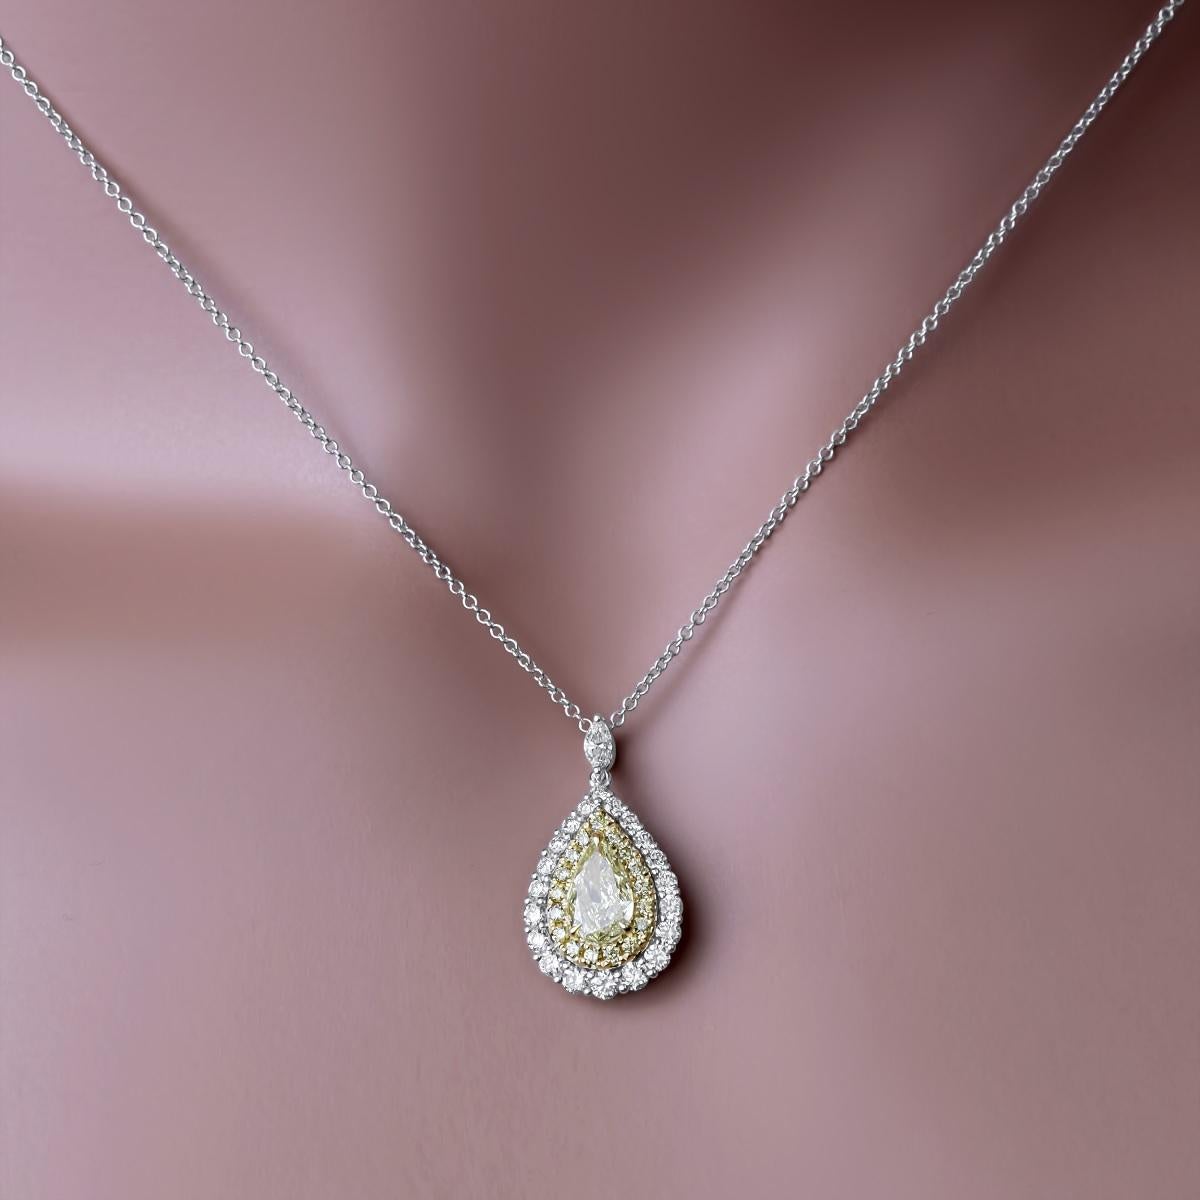 This pendant showcases a  0.70 carat pear-shaped yellow center, encircled by a halo of round yellow diamonds, creating the illusion of a more substantial centerpiece. It is further surrounded by an additional halo of round white diamonds, lending it